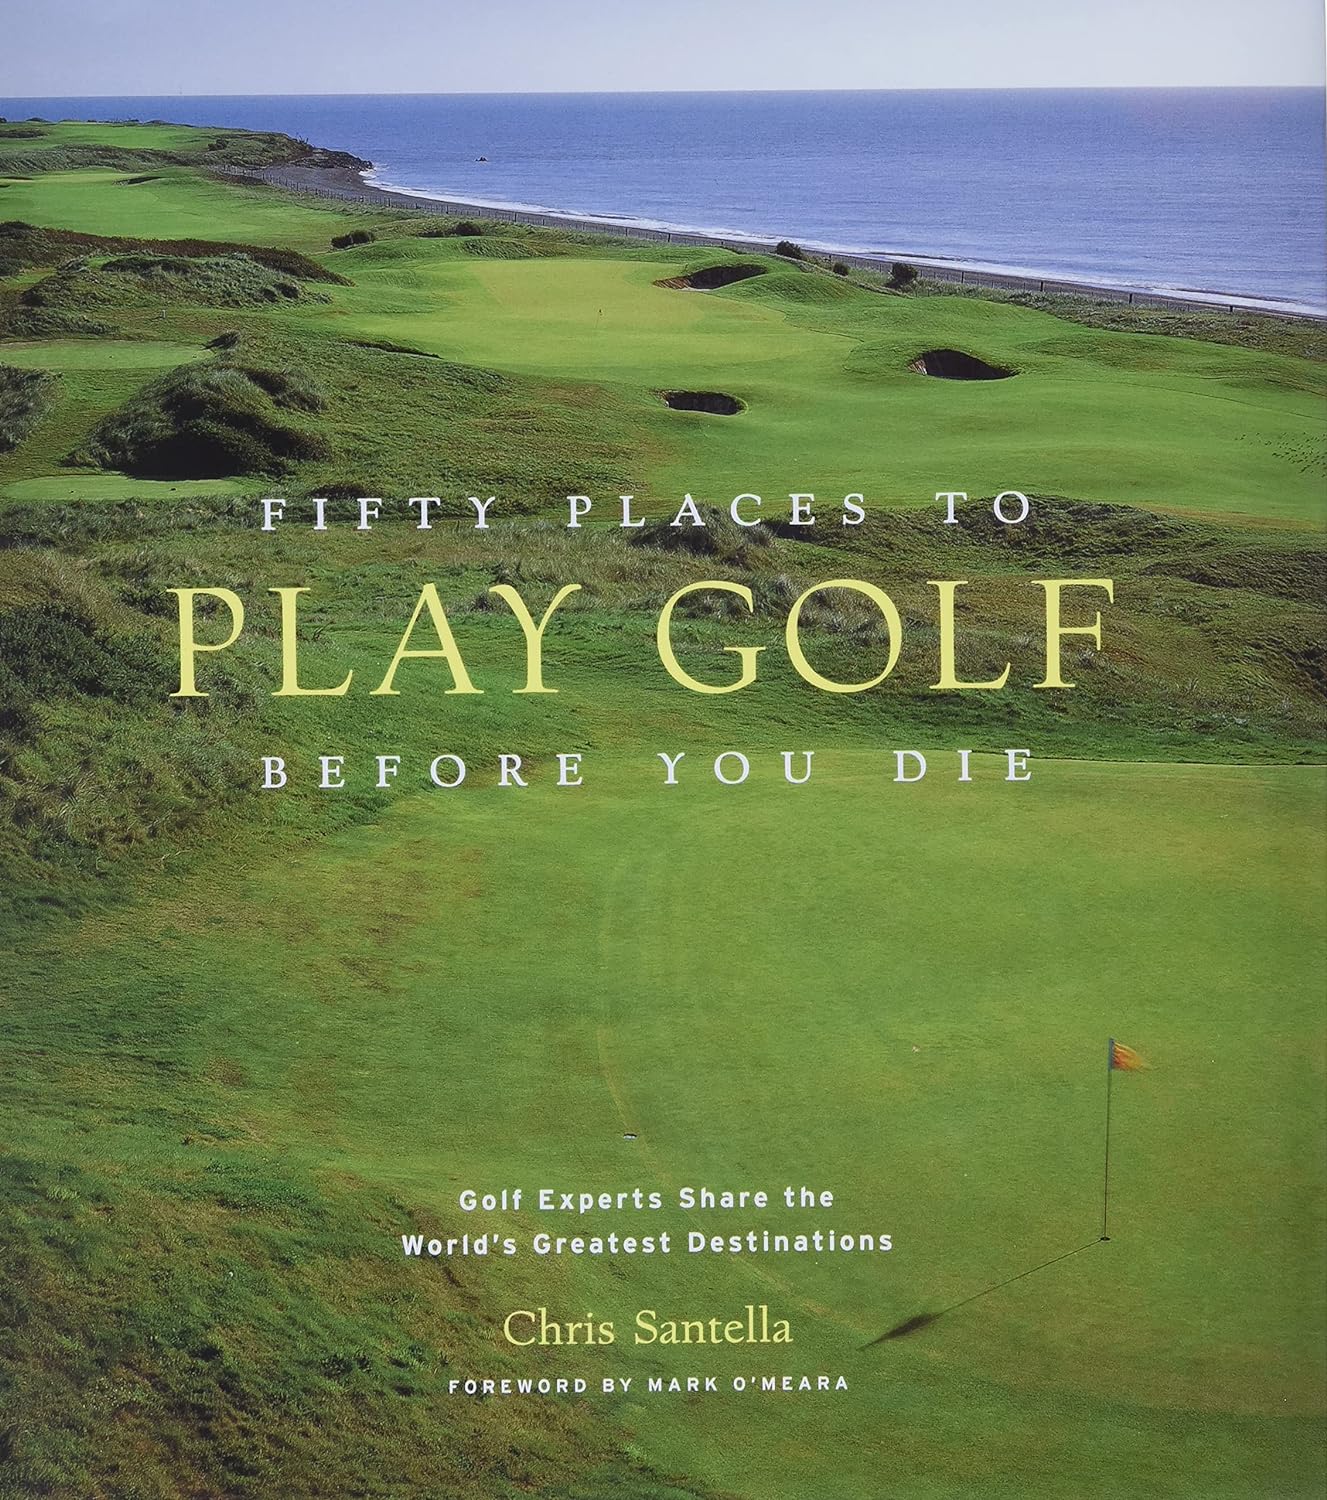 Fifty Places to Play Golf Before You Die by Chris Santella